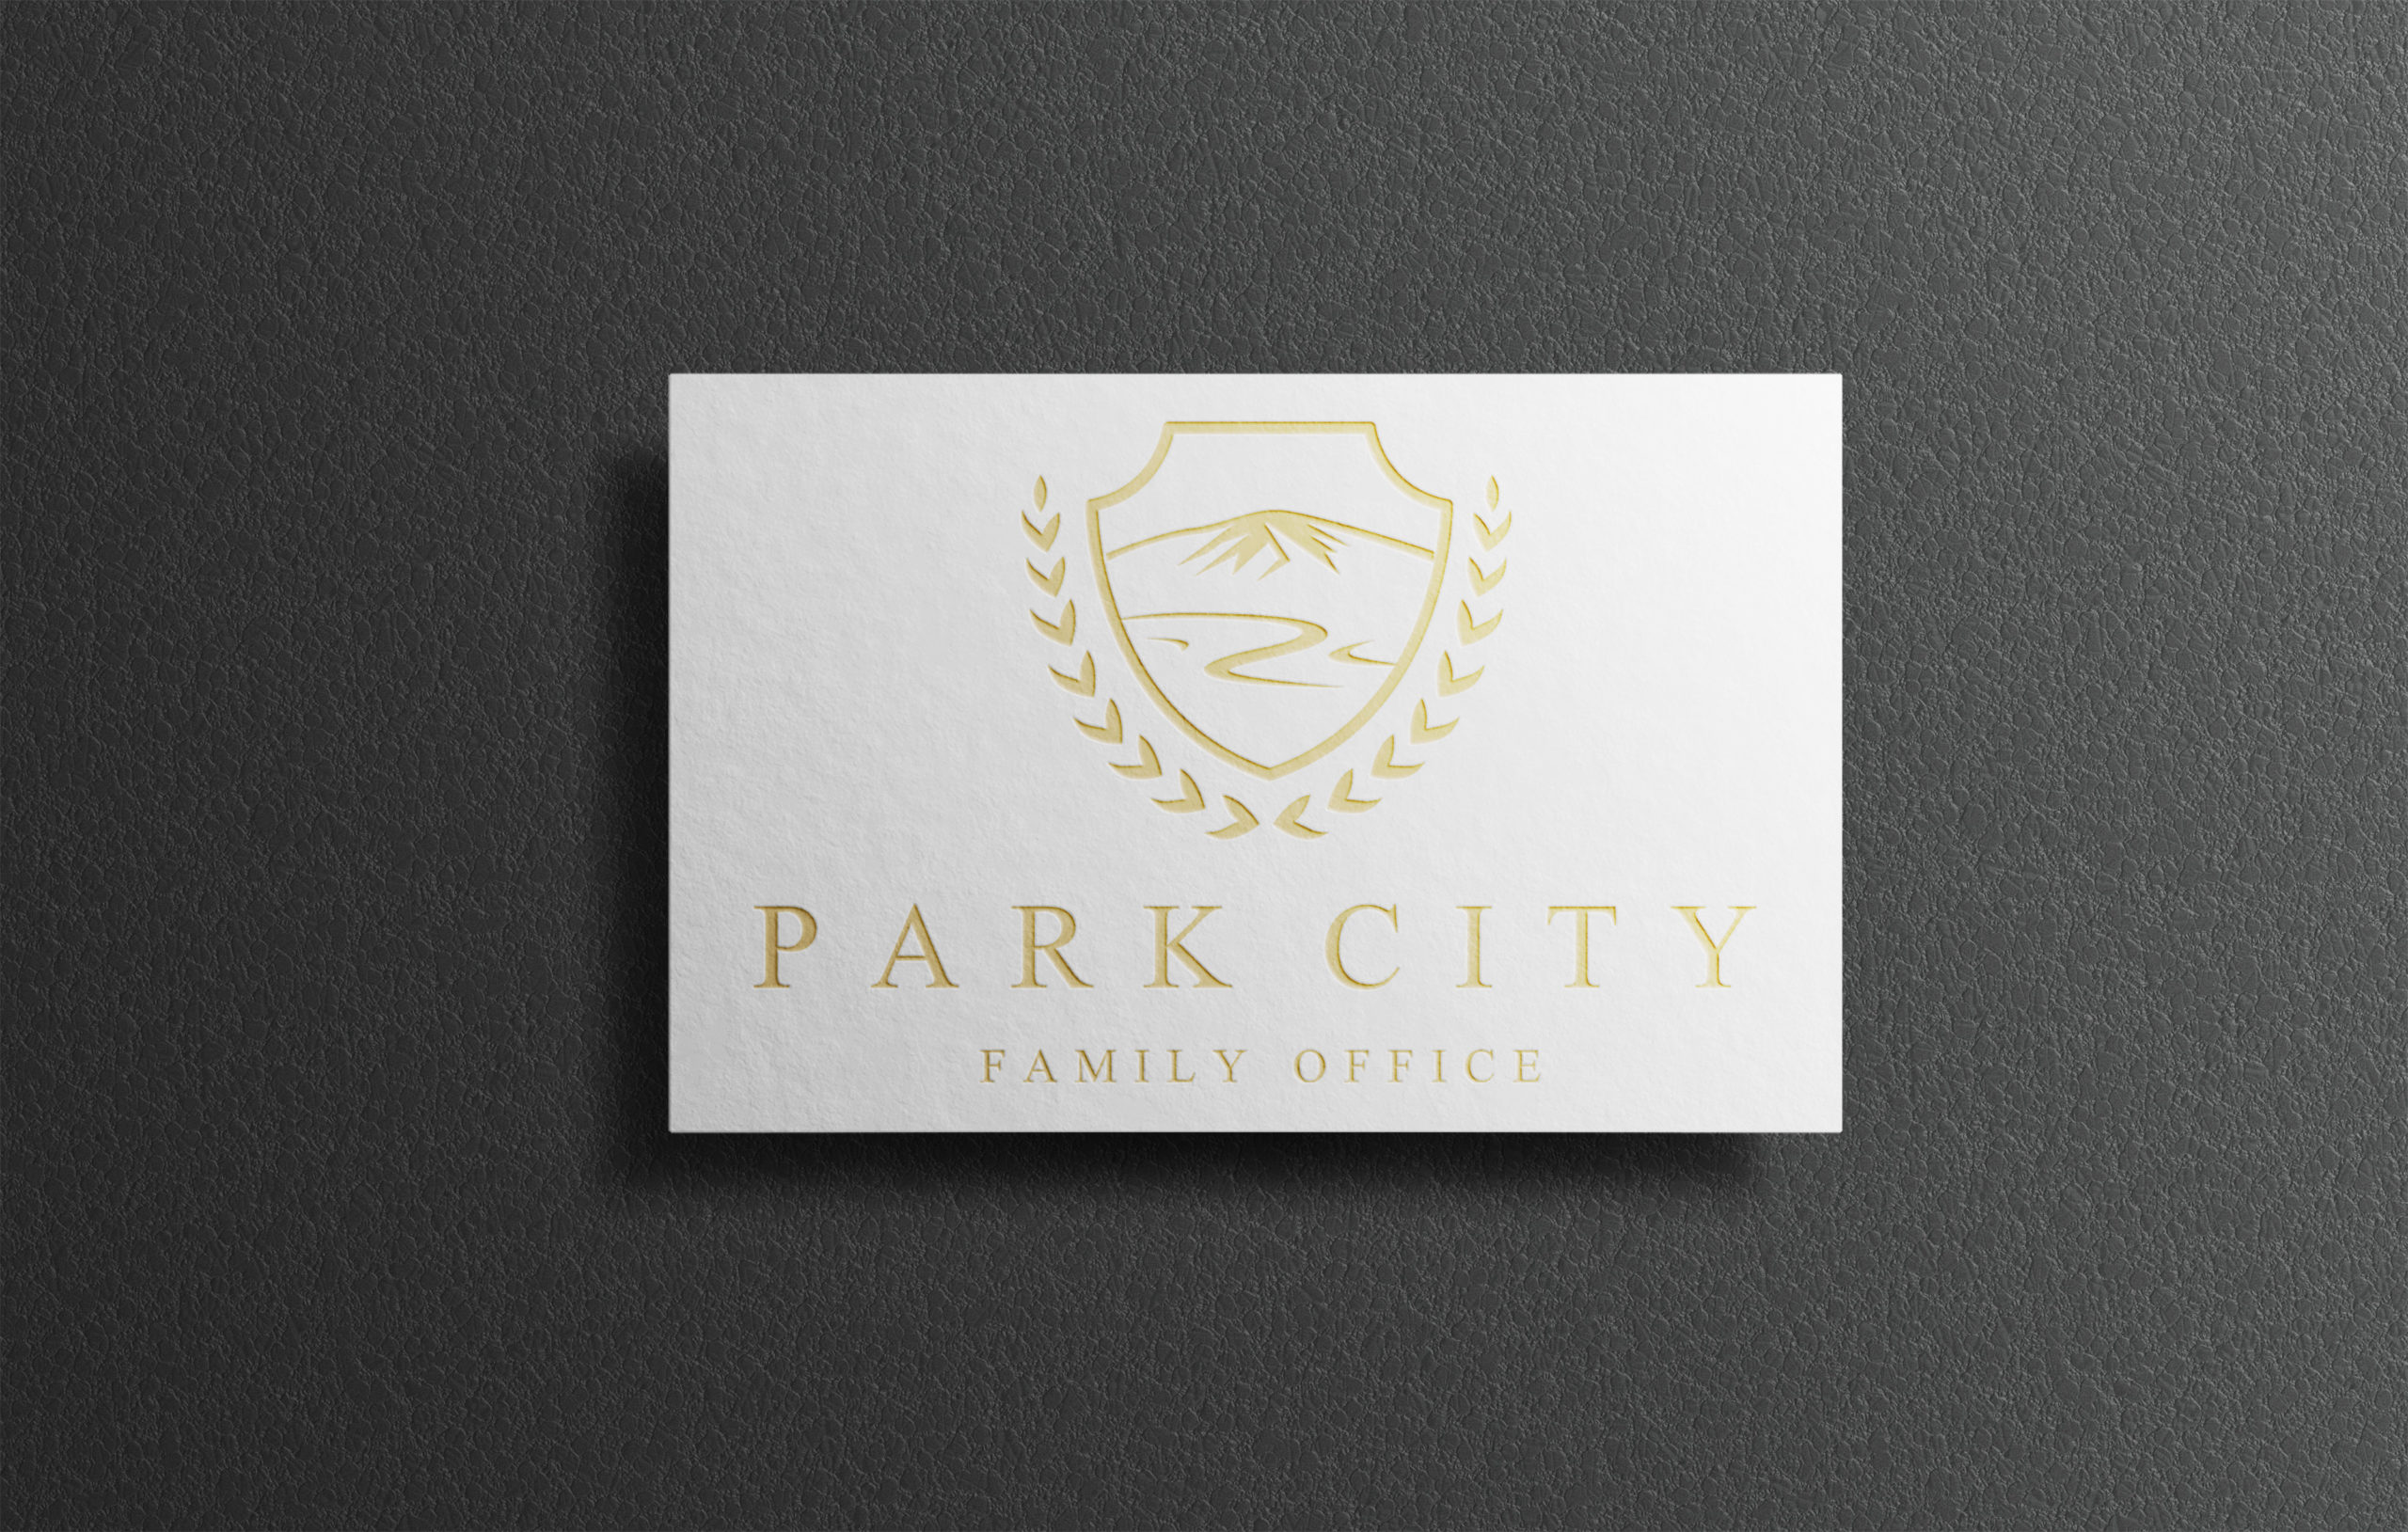 The Park City Family Office logo pays homage to the beautiful area they live in while being opulent for their family office lcients.